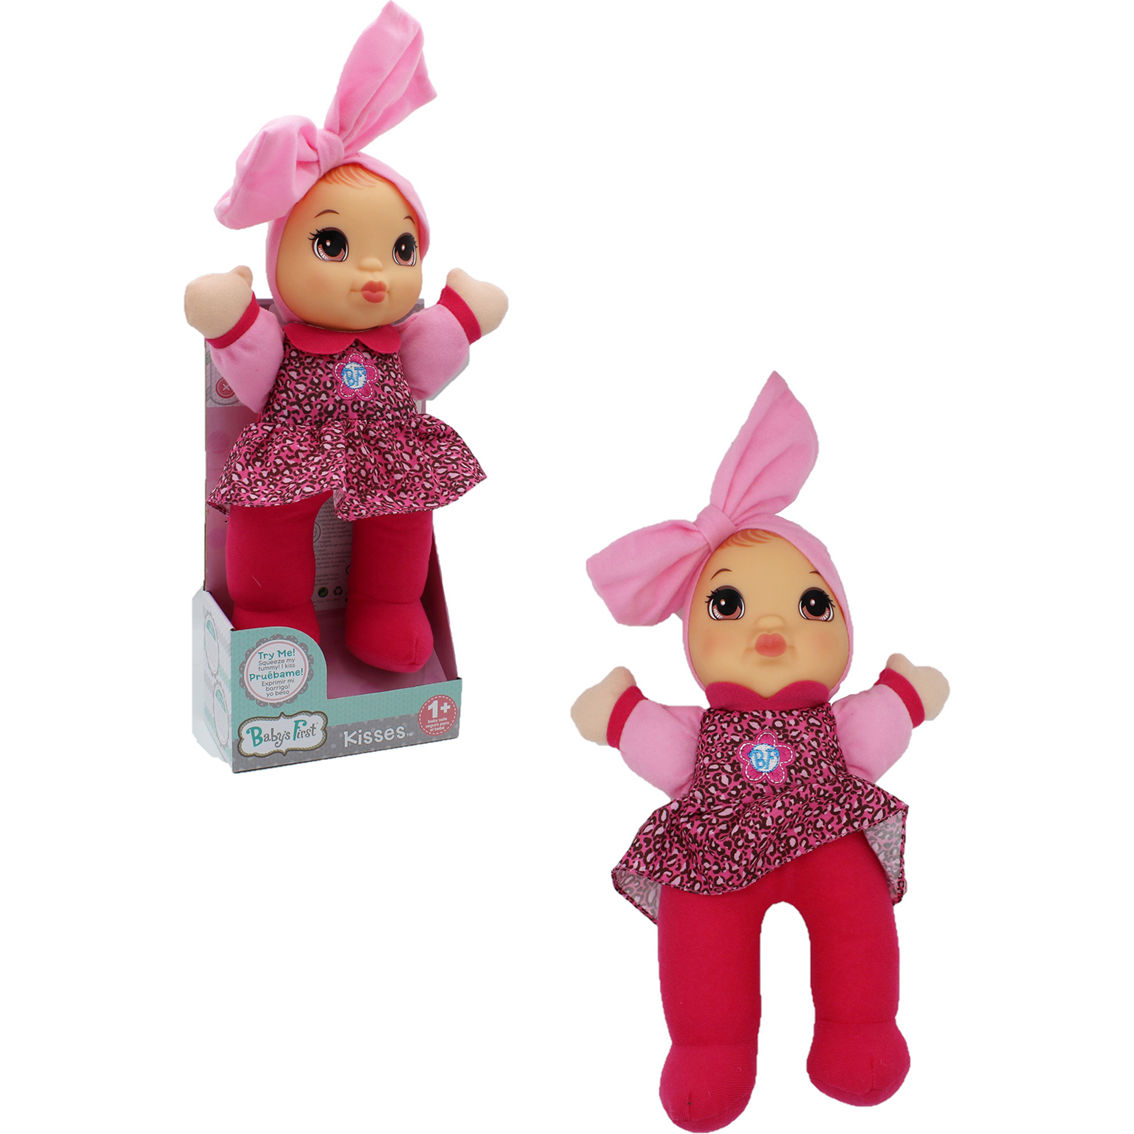 Goldberger Baby's First Kisses Bi Lingual Doll, English and Spanish - Image 3 of 5